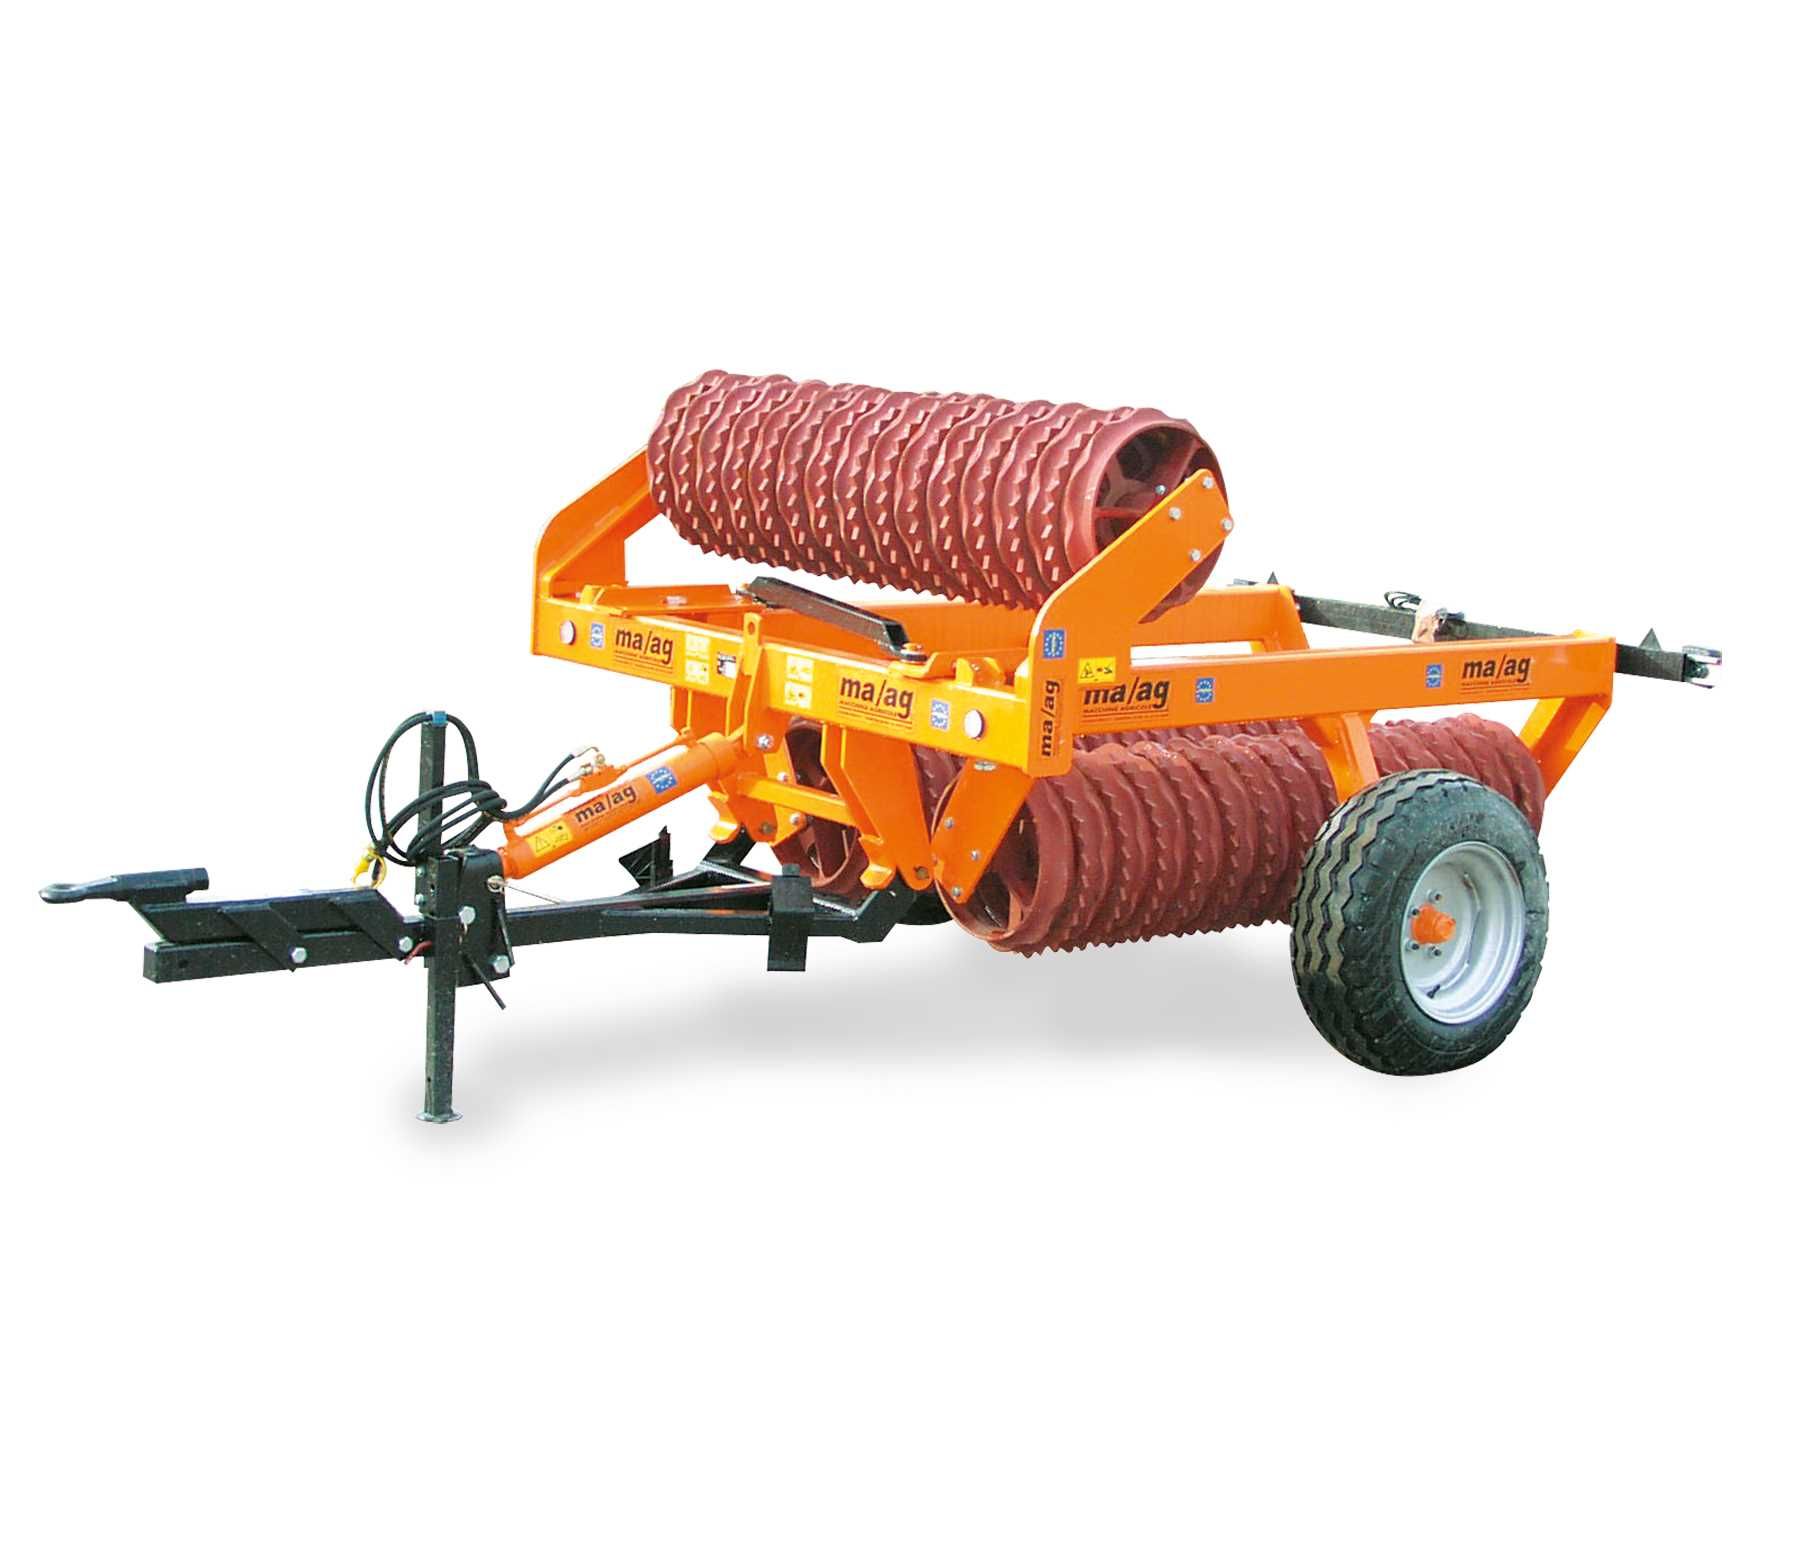 Compactor rollers and breaking soil